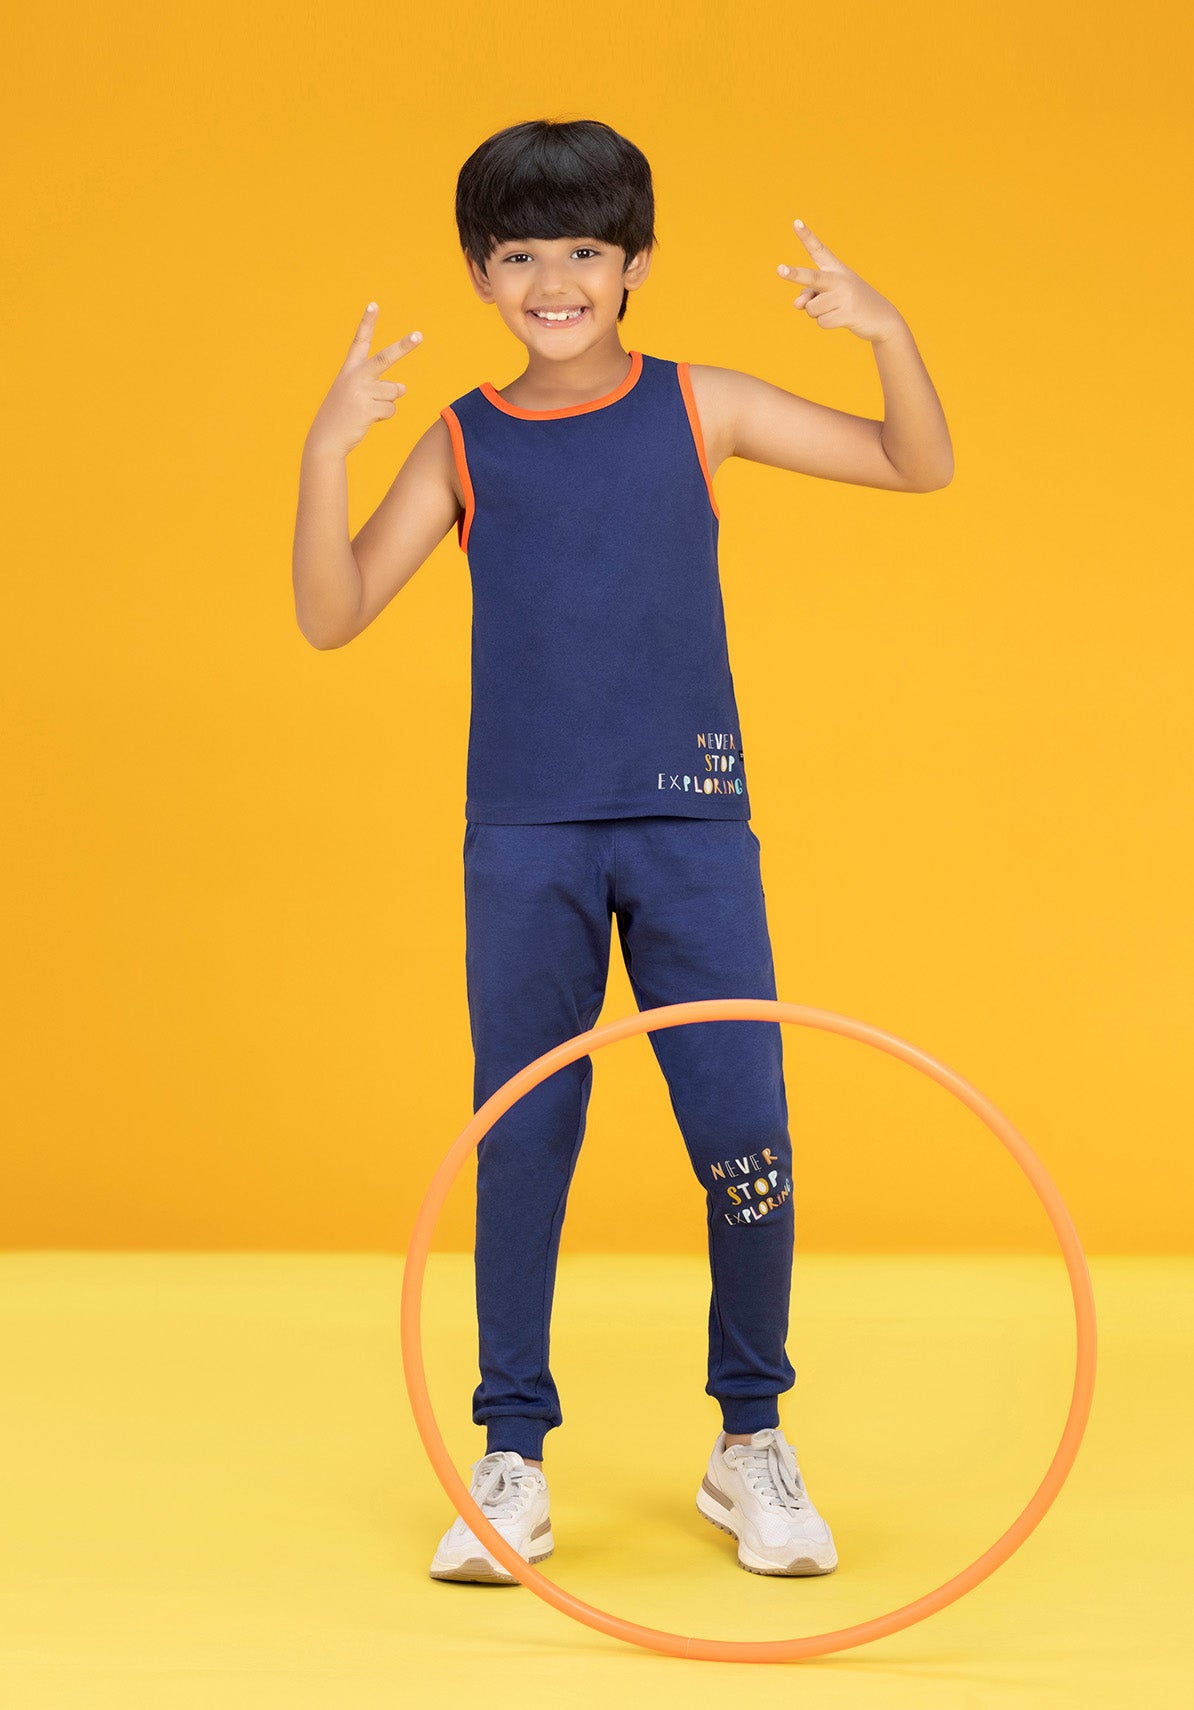 Playmate Boys Joggers Blue Combed Cotton